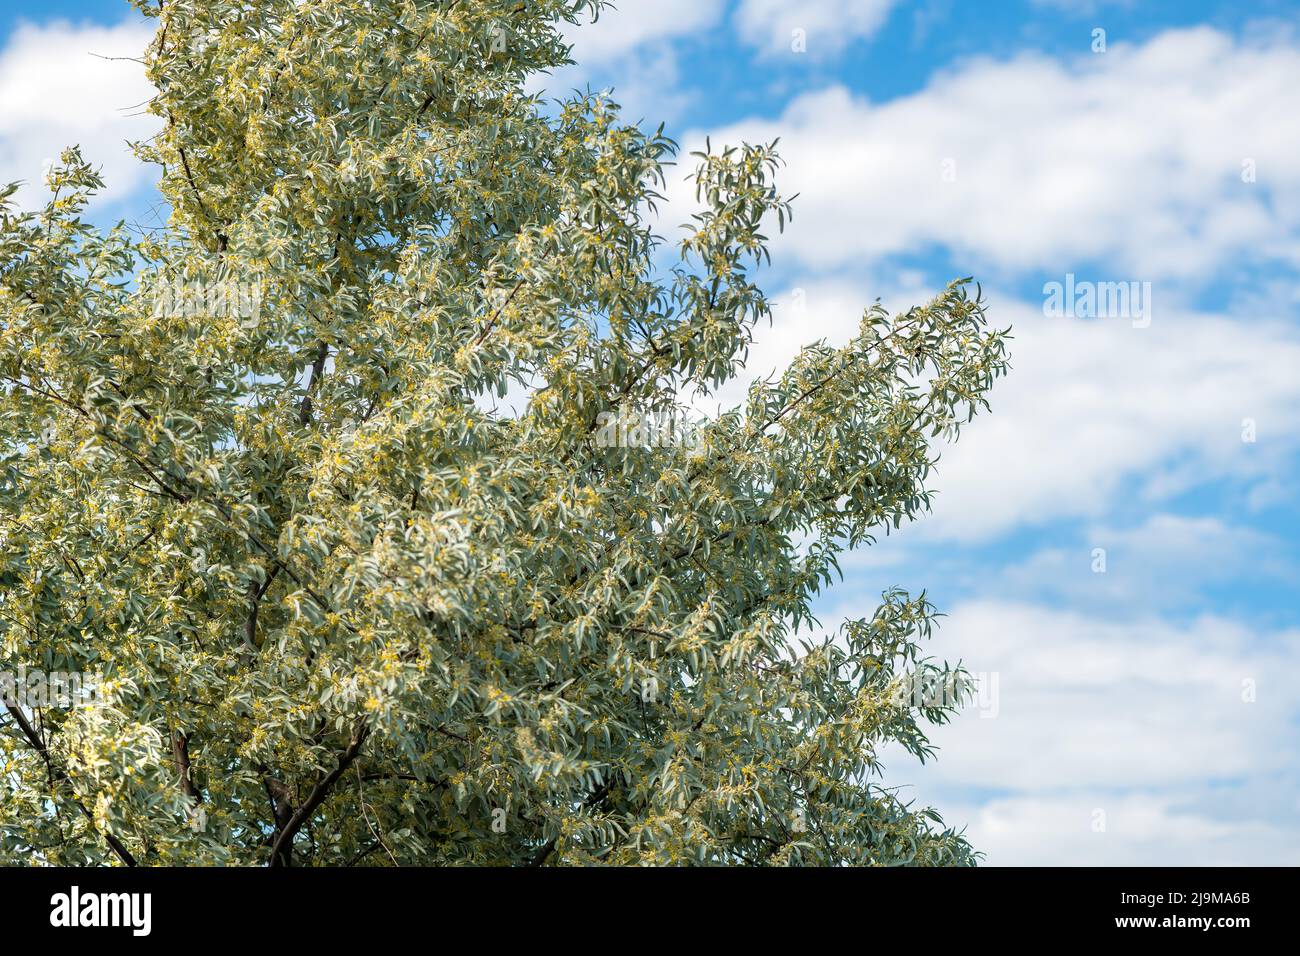 Elaeagnus angustifolia, commonly known as Russian olive is blooming in spring on a windy day Stock Photo